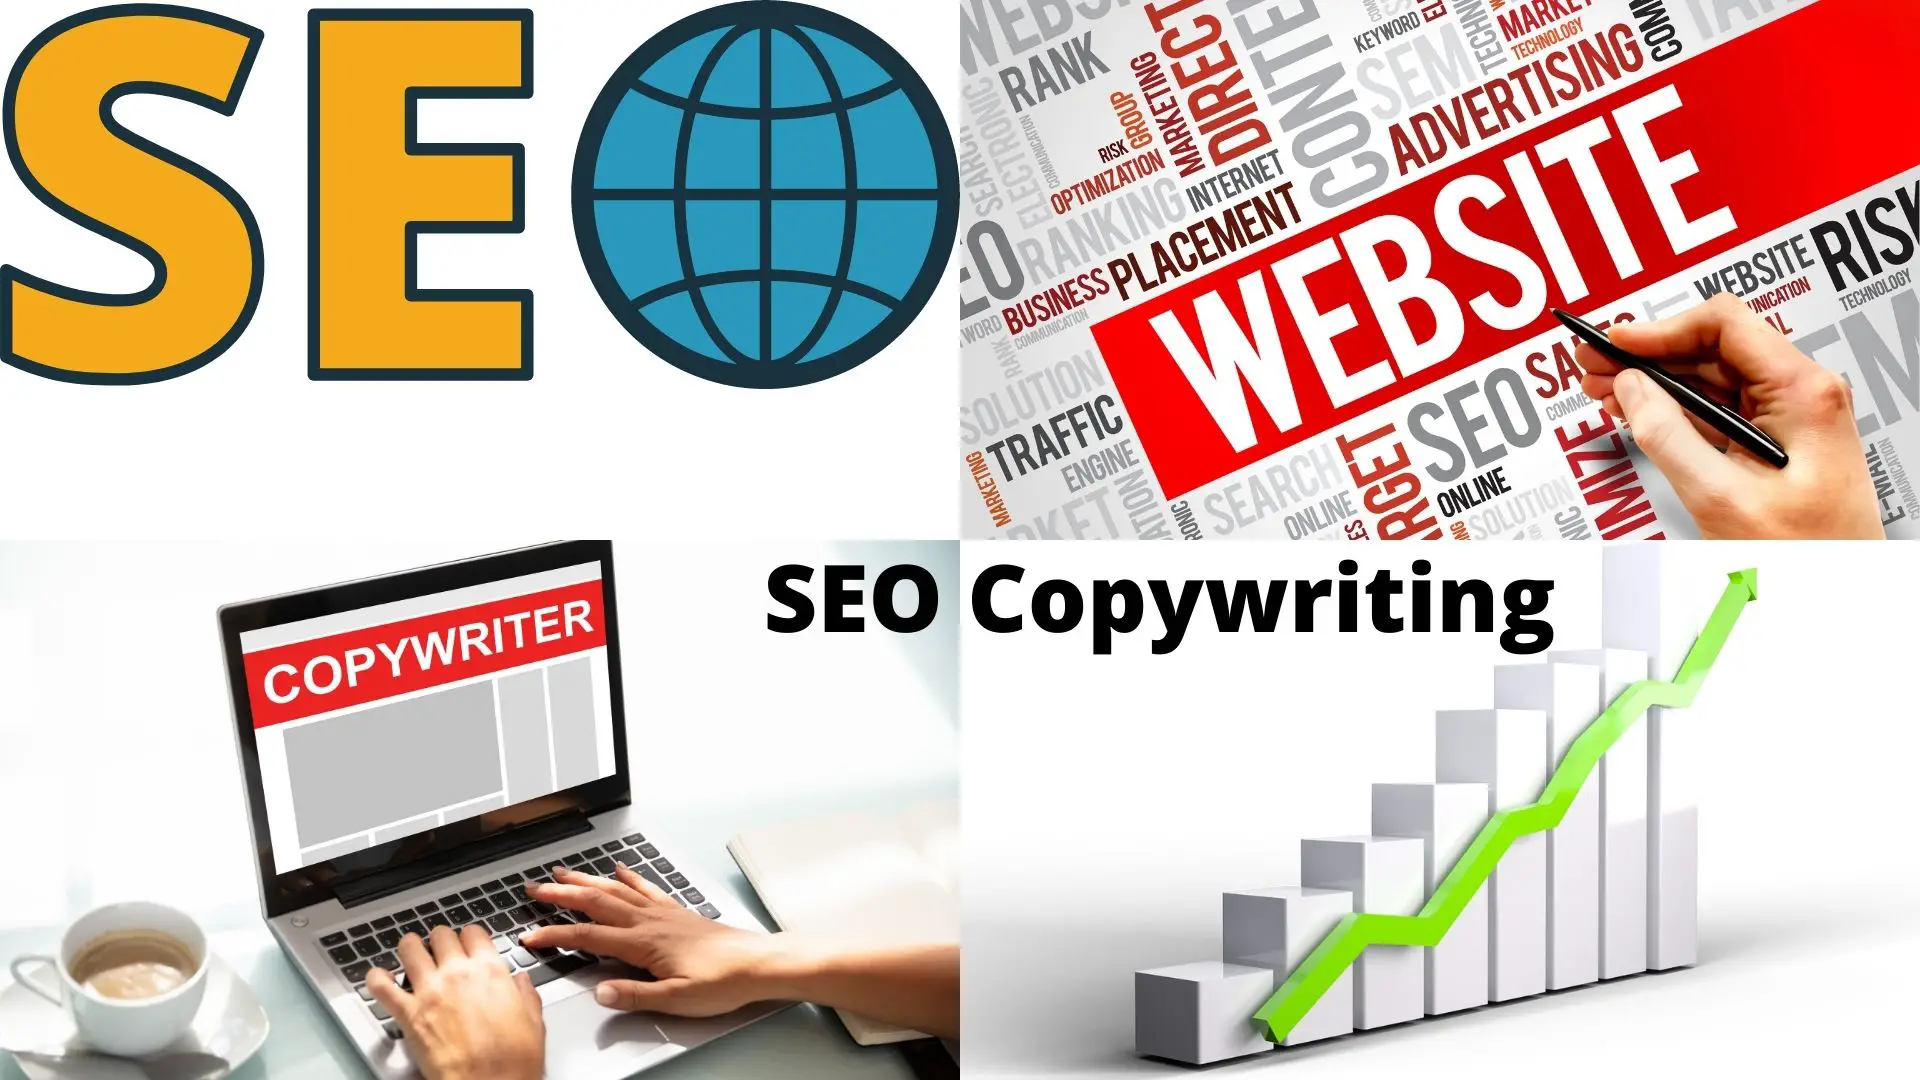 13 SEO Copywriting Secrets Every Website Owner Needs To Know